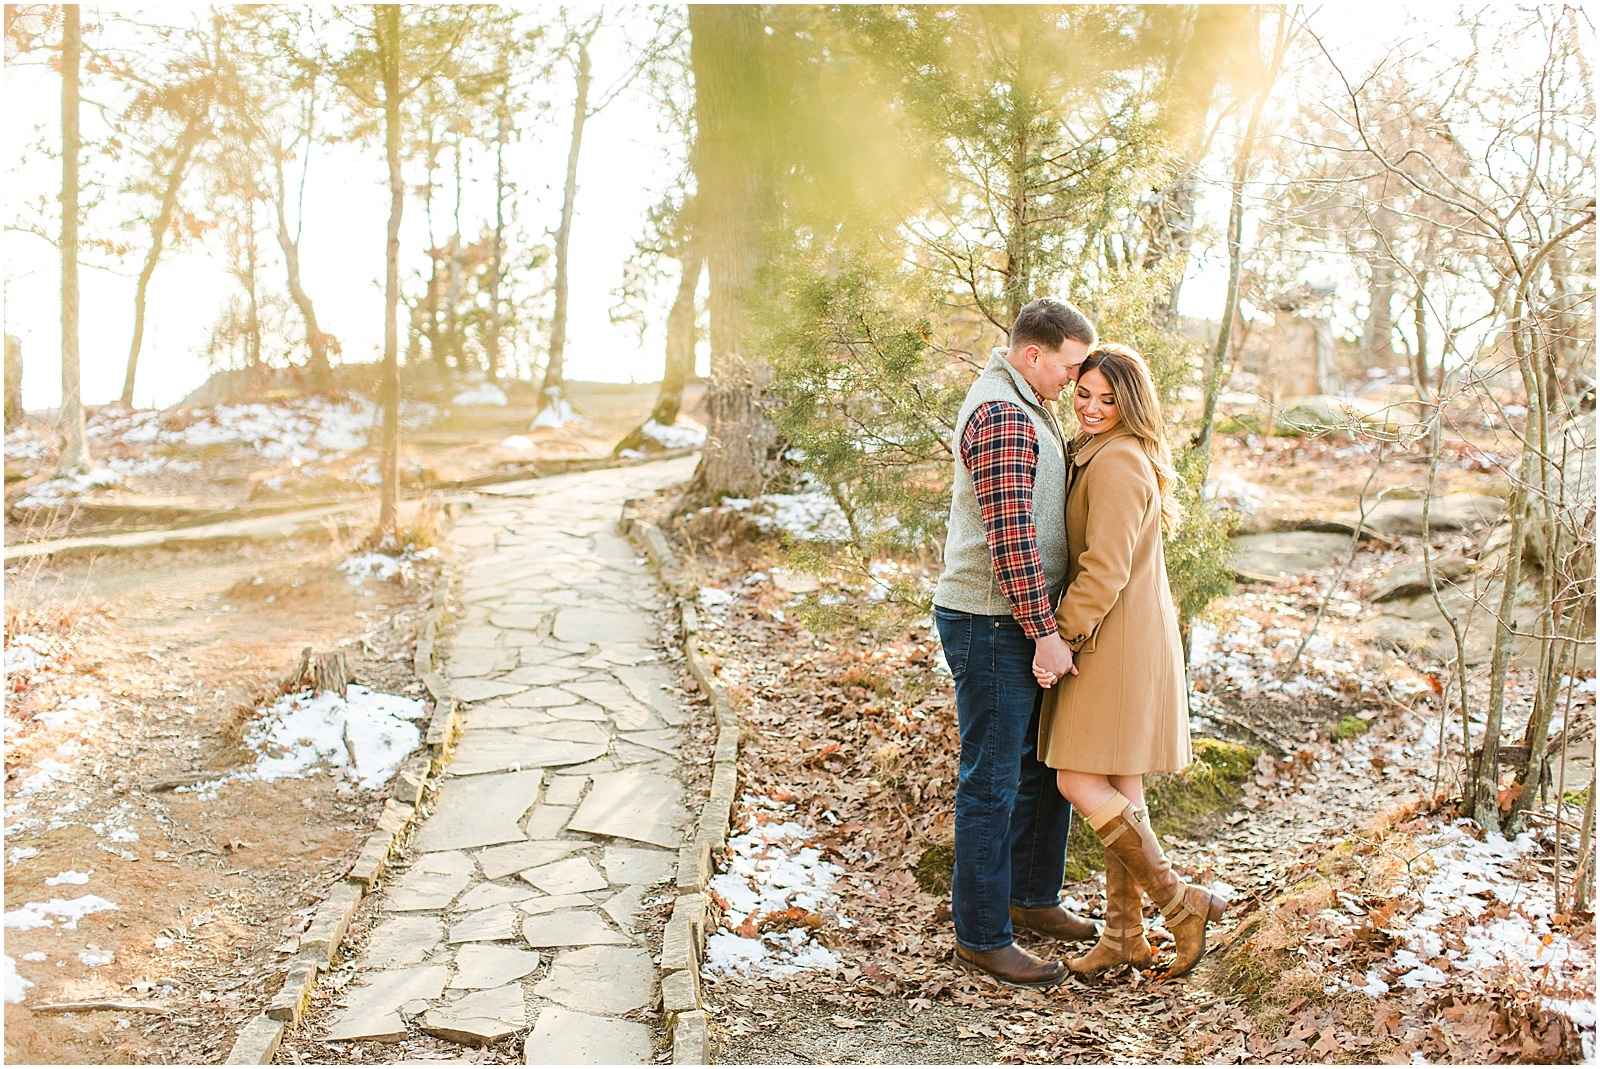 A Sunny Garden of the Gods Engagement Session | Shiloh and Lee | Bret and Brandie Photography026.jpg